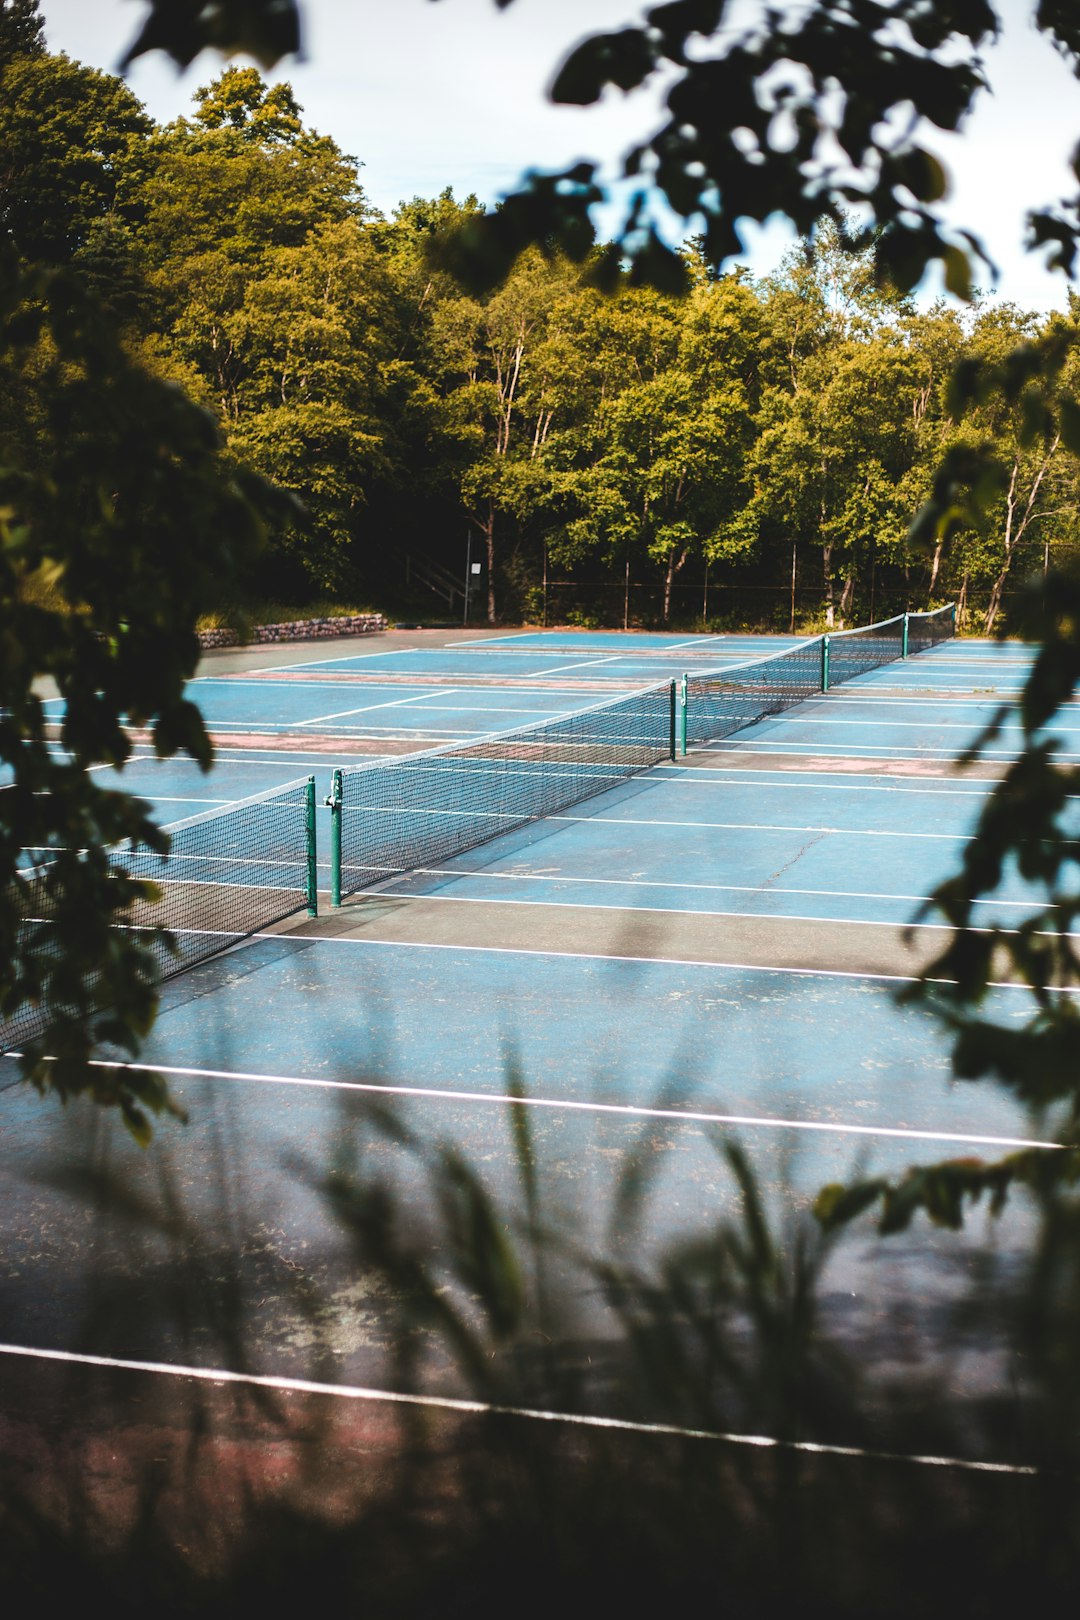 blue and white basketball court surrounded by green trees during daytime